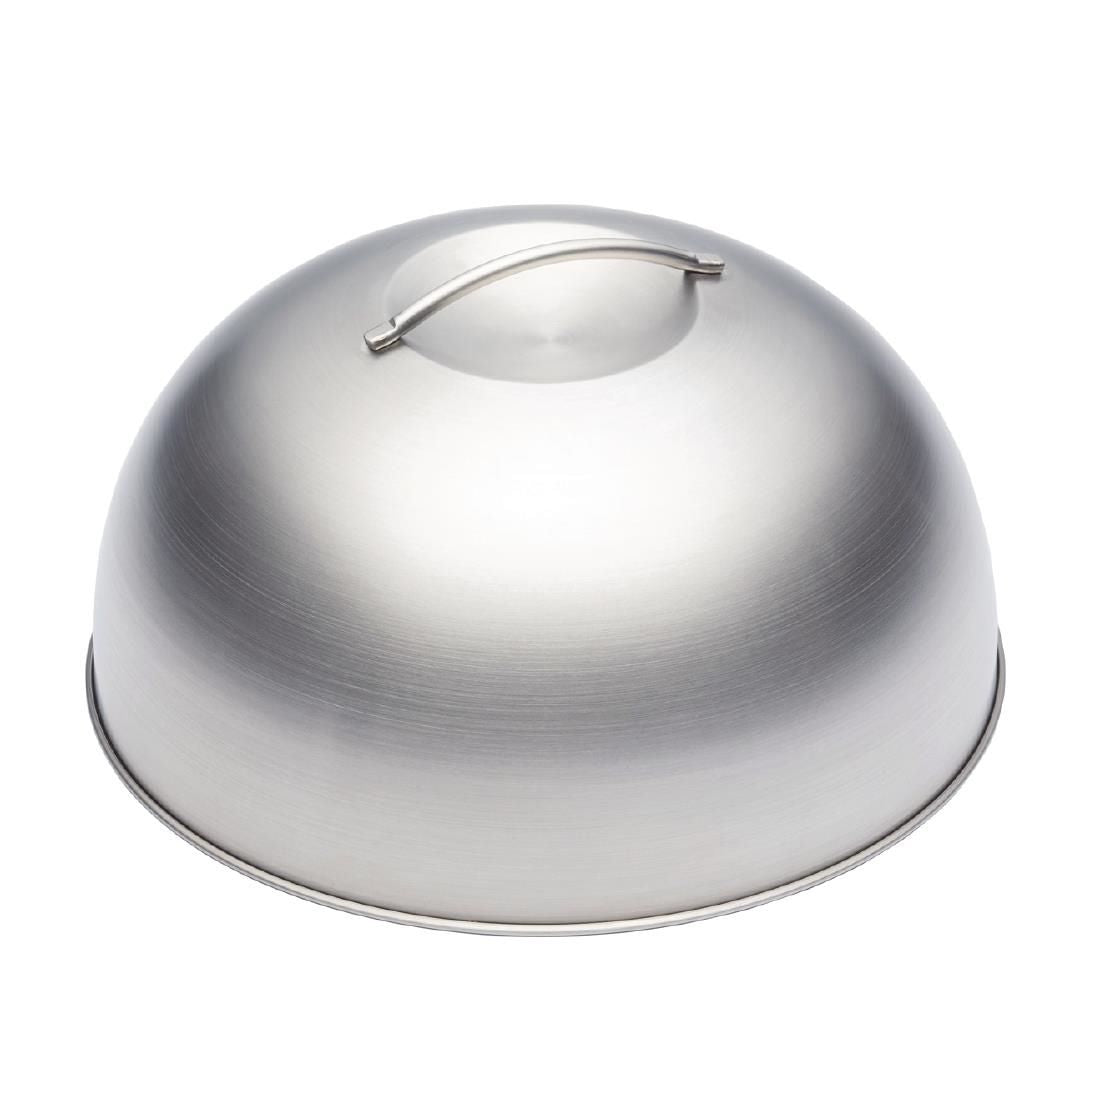 DA807 MasterClass Stainless Steel Melting Dome 225mm JD Catering Equipment Solutions Ltd